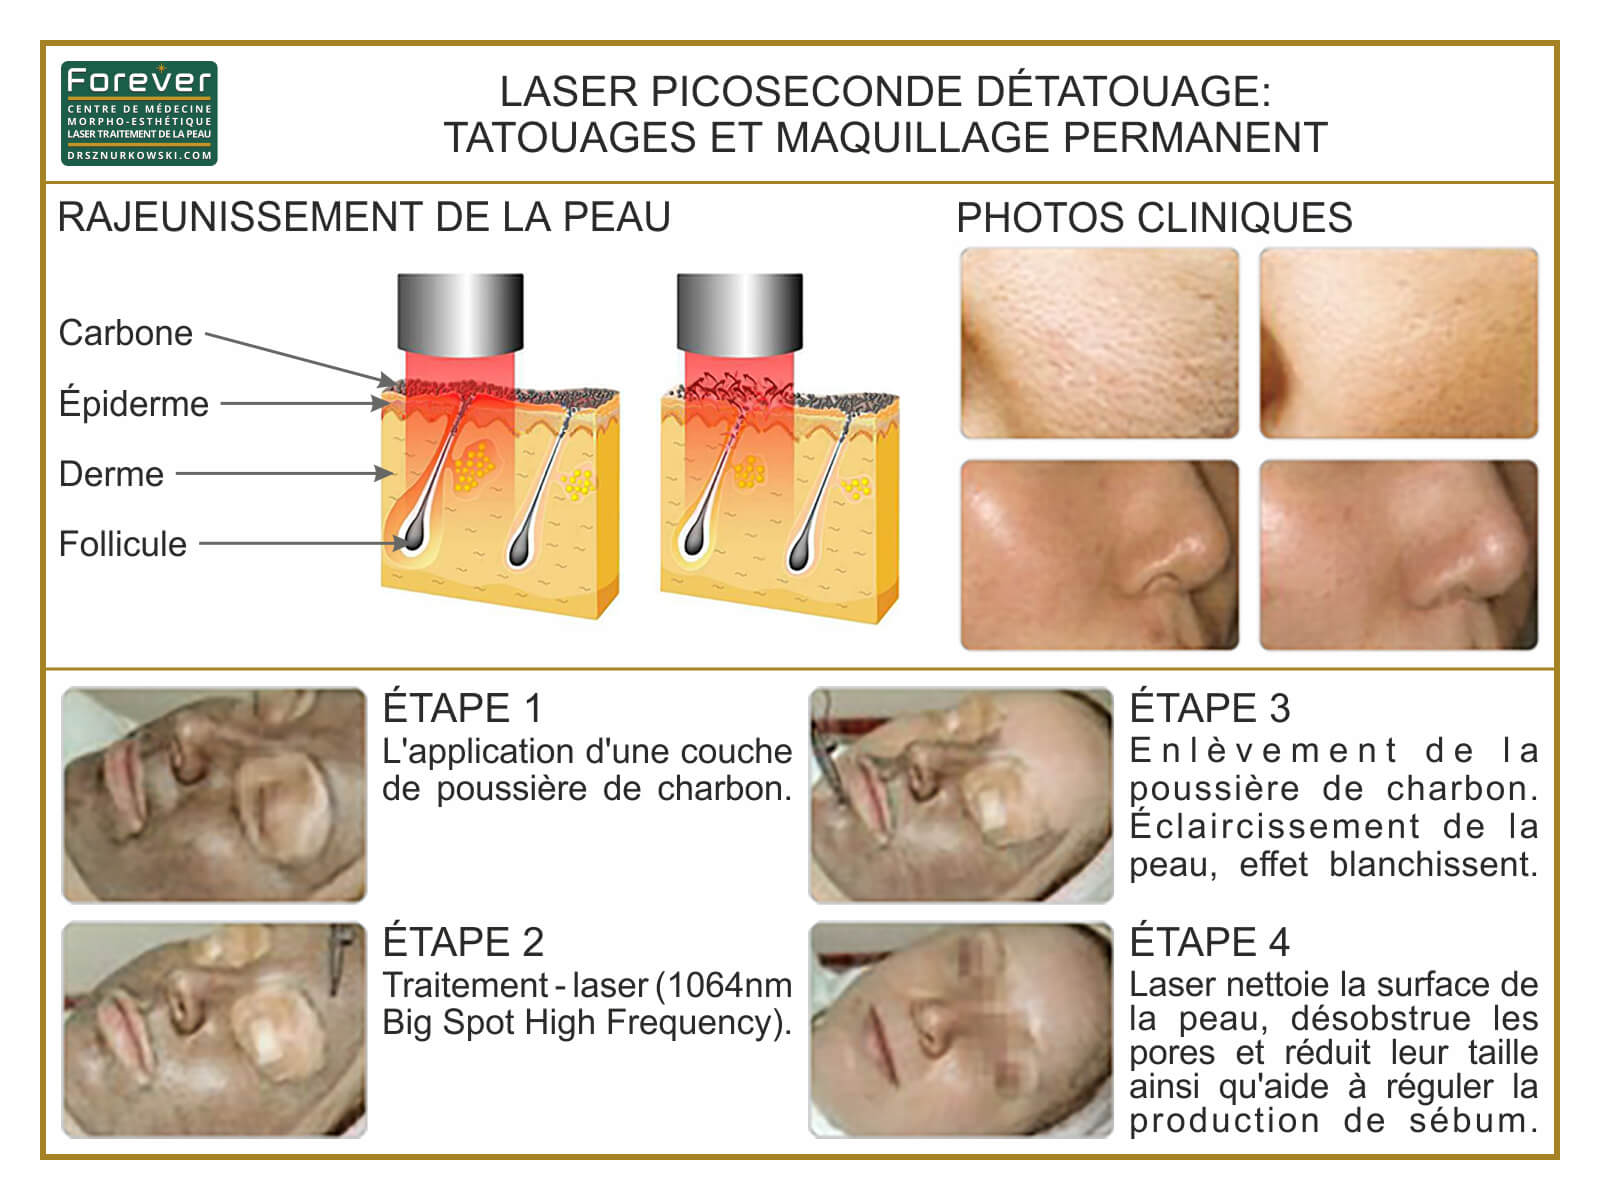 Permanent Make-up And Melasma Removal, Spots, Picosecond... (80x60) FR.jpg